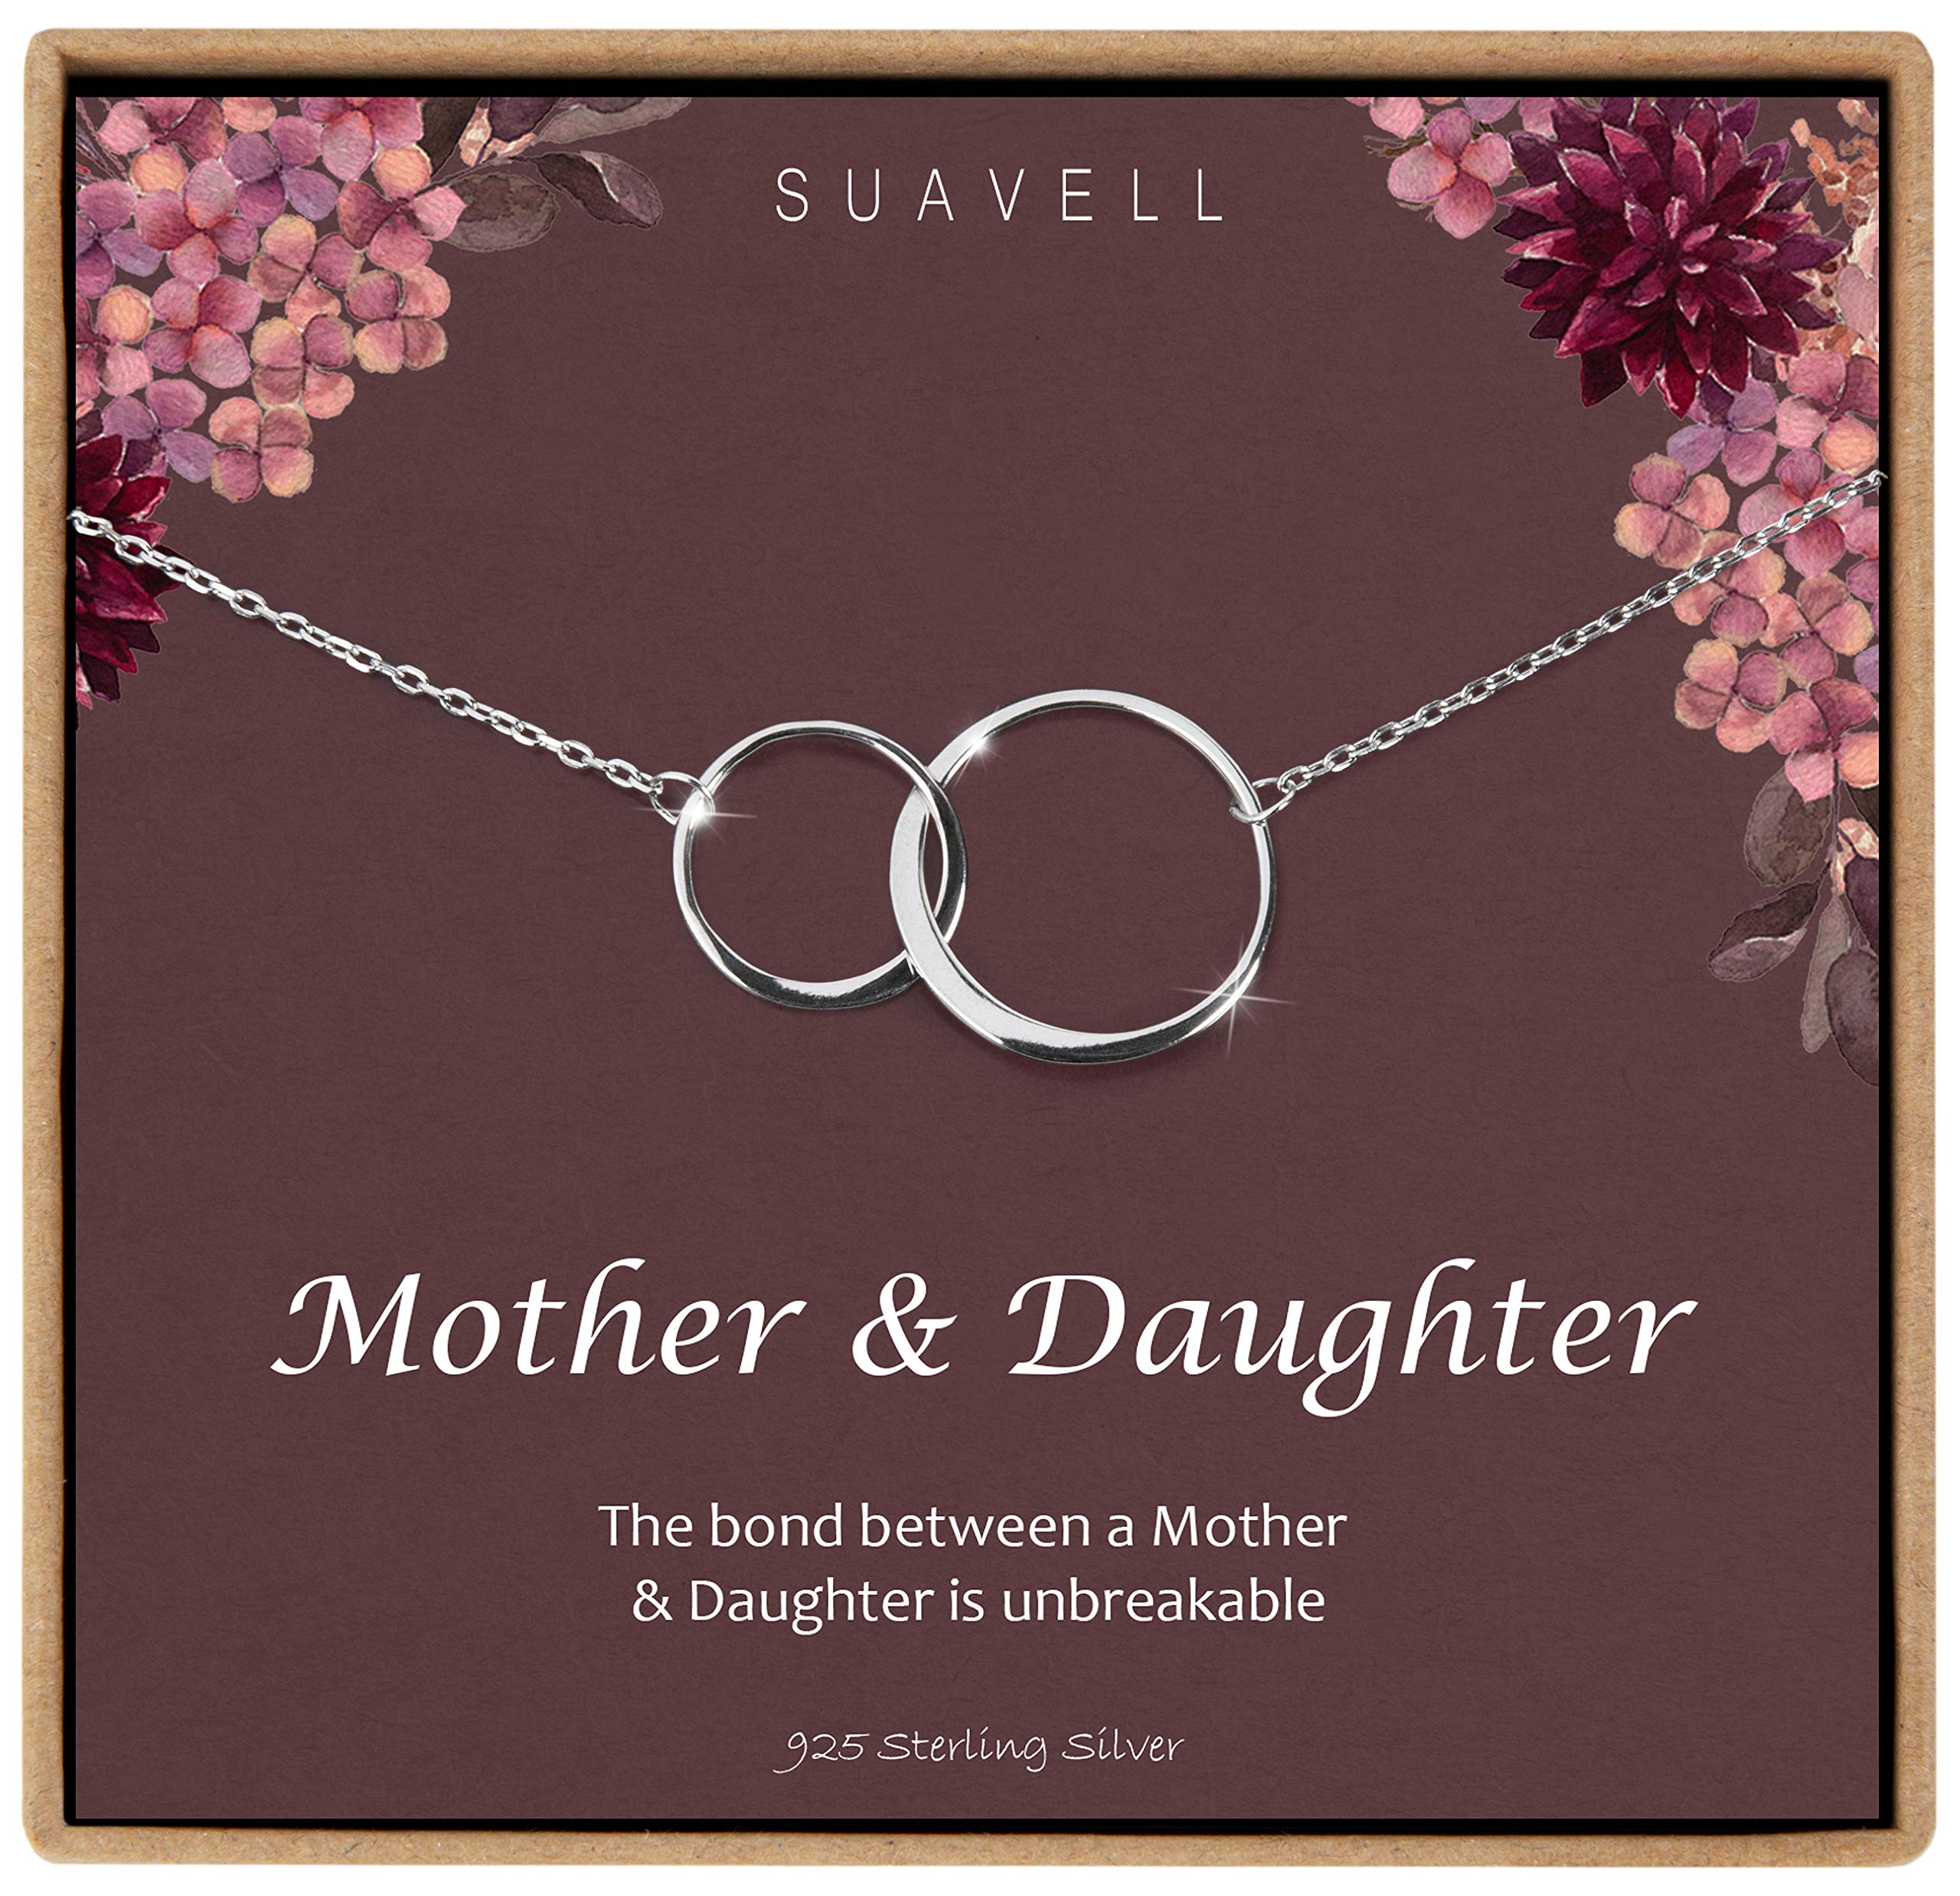 Suavell Mother Daughter Necklace. Sterling Silver Necklace for Women. Mom Gifts. 2 Circle Necklace Pendant on Dainty Necklace Chain. Minimalist Jewelry, Daughter Gift from Mom, Birthday